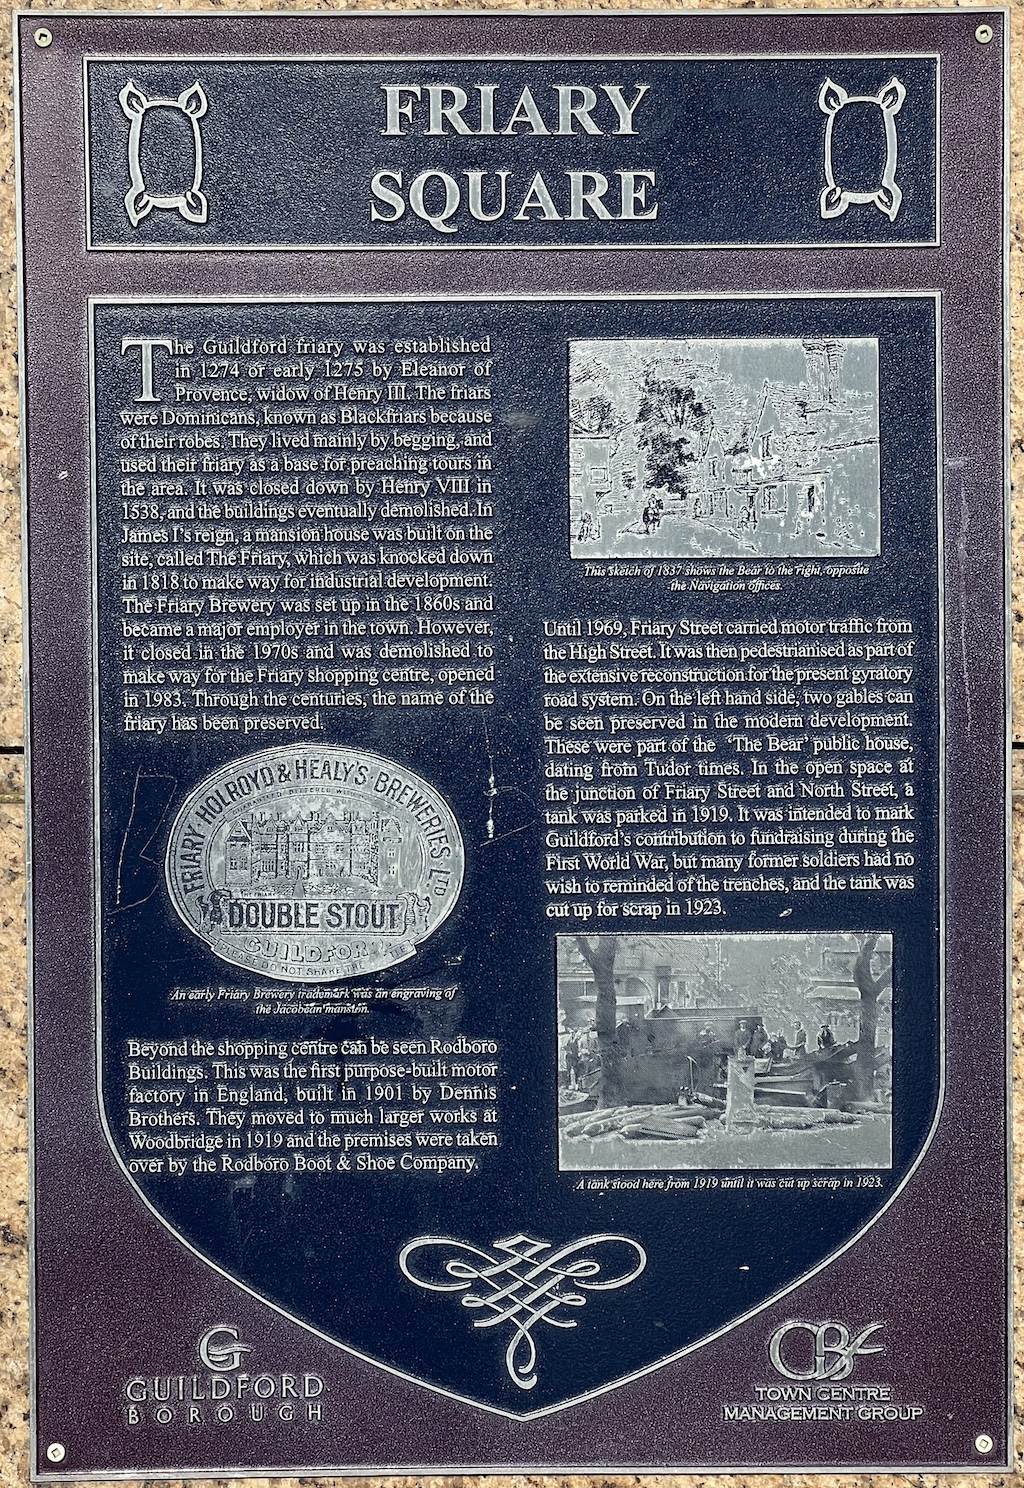 Blue plaque in Guildford for Friary Square